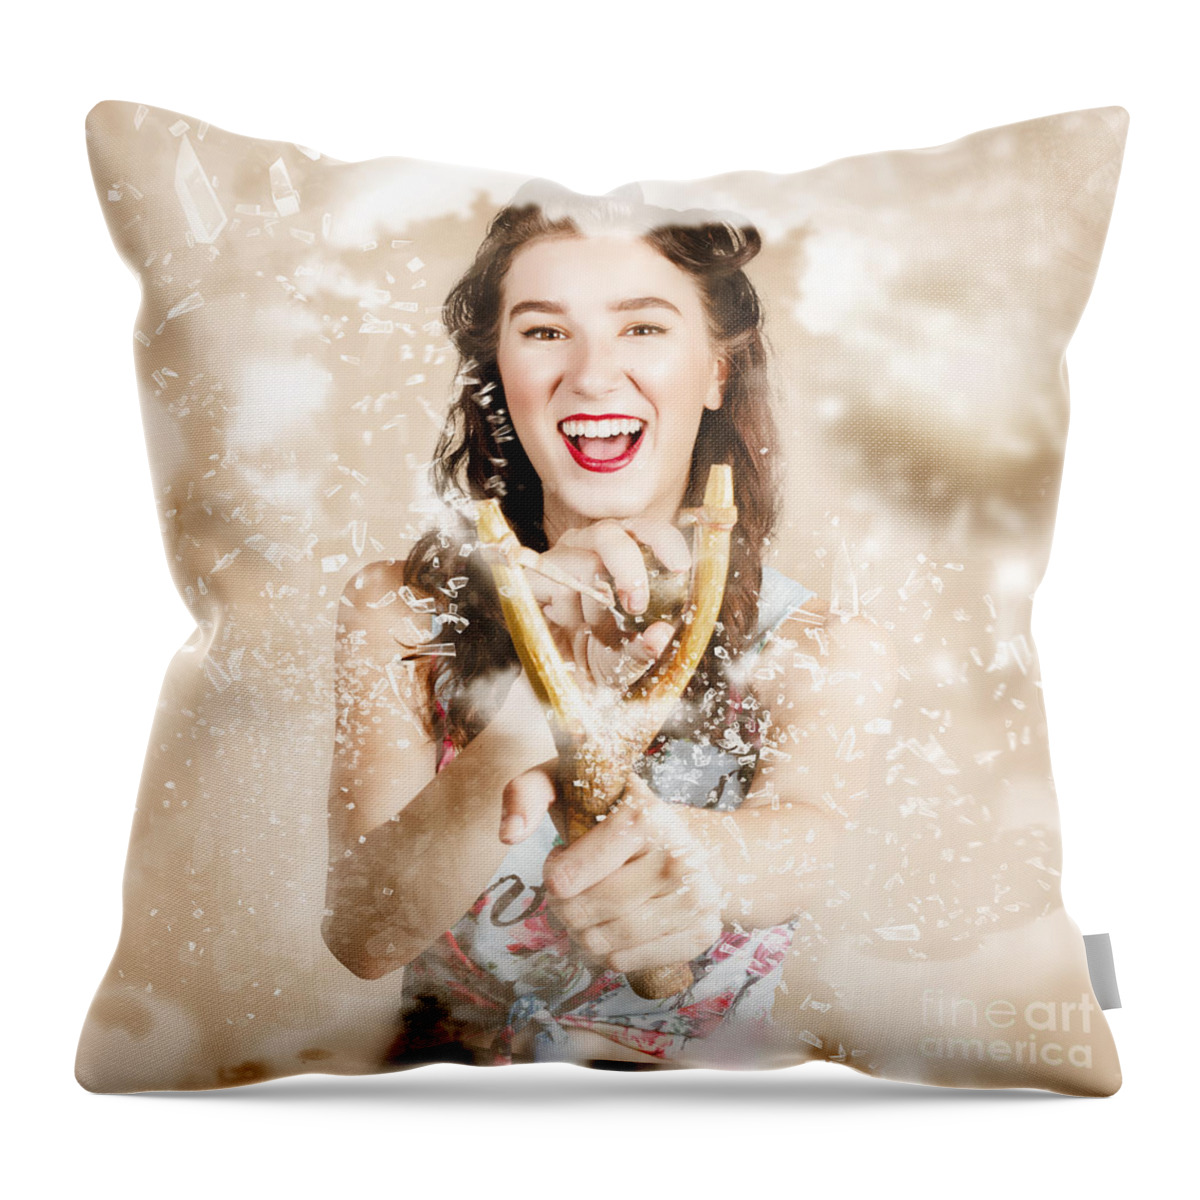 Target Throw Pillow featuring the photograph Pinup woman shooting rocks with toy slingshot by Jorgo Photography